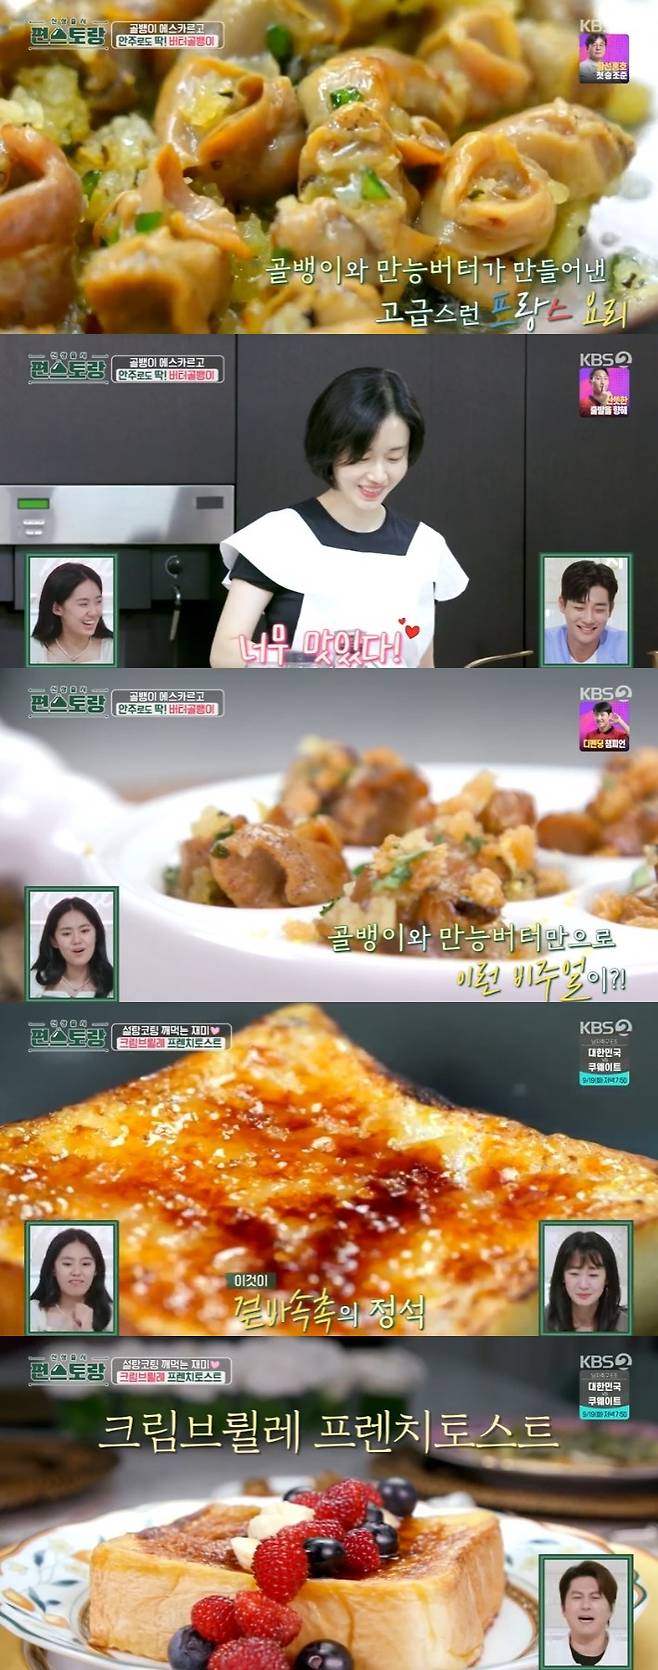 In the KBS 2TV entertainment program Stars Top Recipe at Fun-Staurant broadcasted on the 15th, Lee Jung-hyun presented a variety of dishes with Lee Yongs quick ingredients.Lee Jung-hyun then sliced the pan loaf into thick slices and soaked it in milk and egg water to make a crime brulee french toast, then baked both sides of the pan loaf and sprinkled brown sugar on it.He melted the brown sugar sprinkled on the pan loaf by Lee Yong and made it crispy on the outside. He then finished the topping with bananas, raspberries, and blueberries on top of the baked pan loaf.